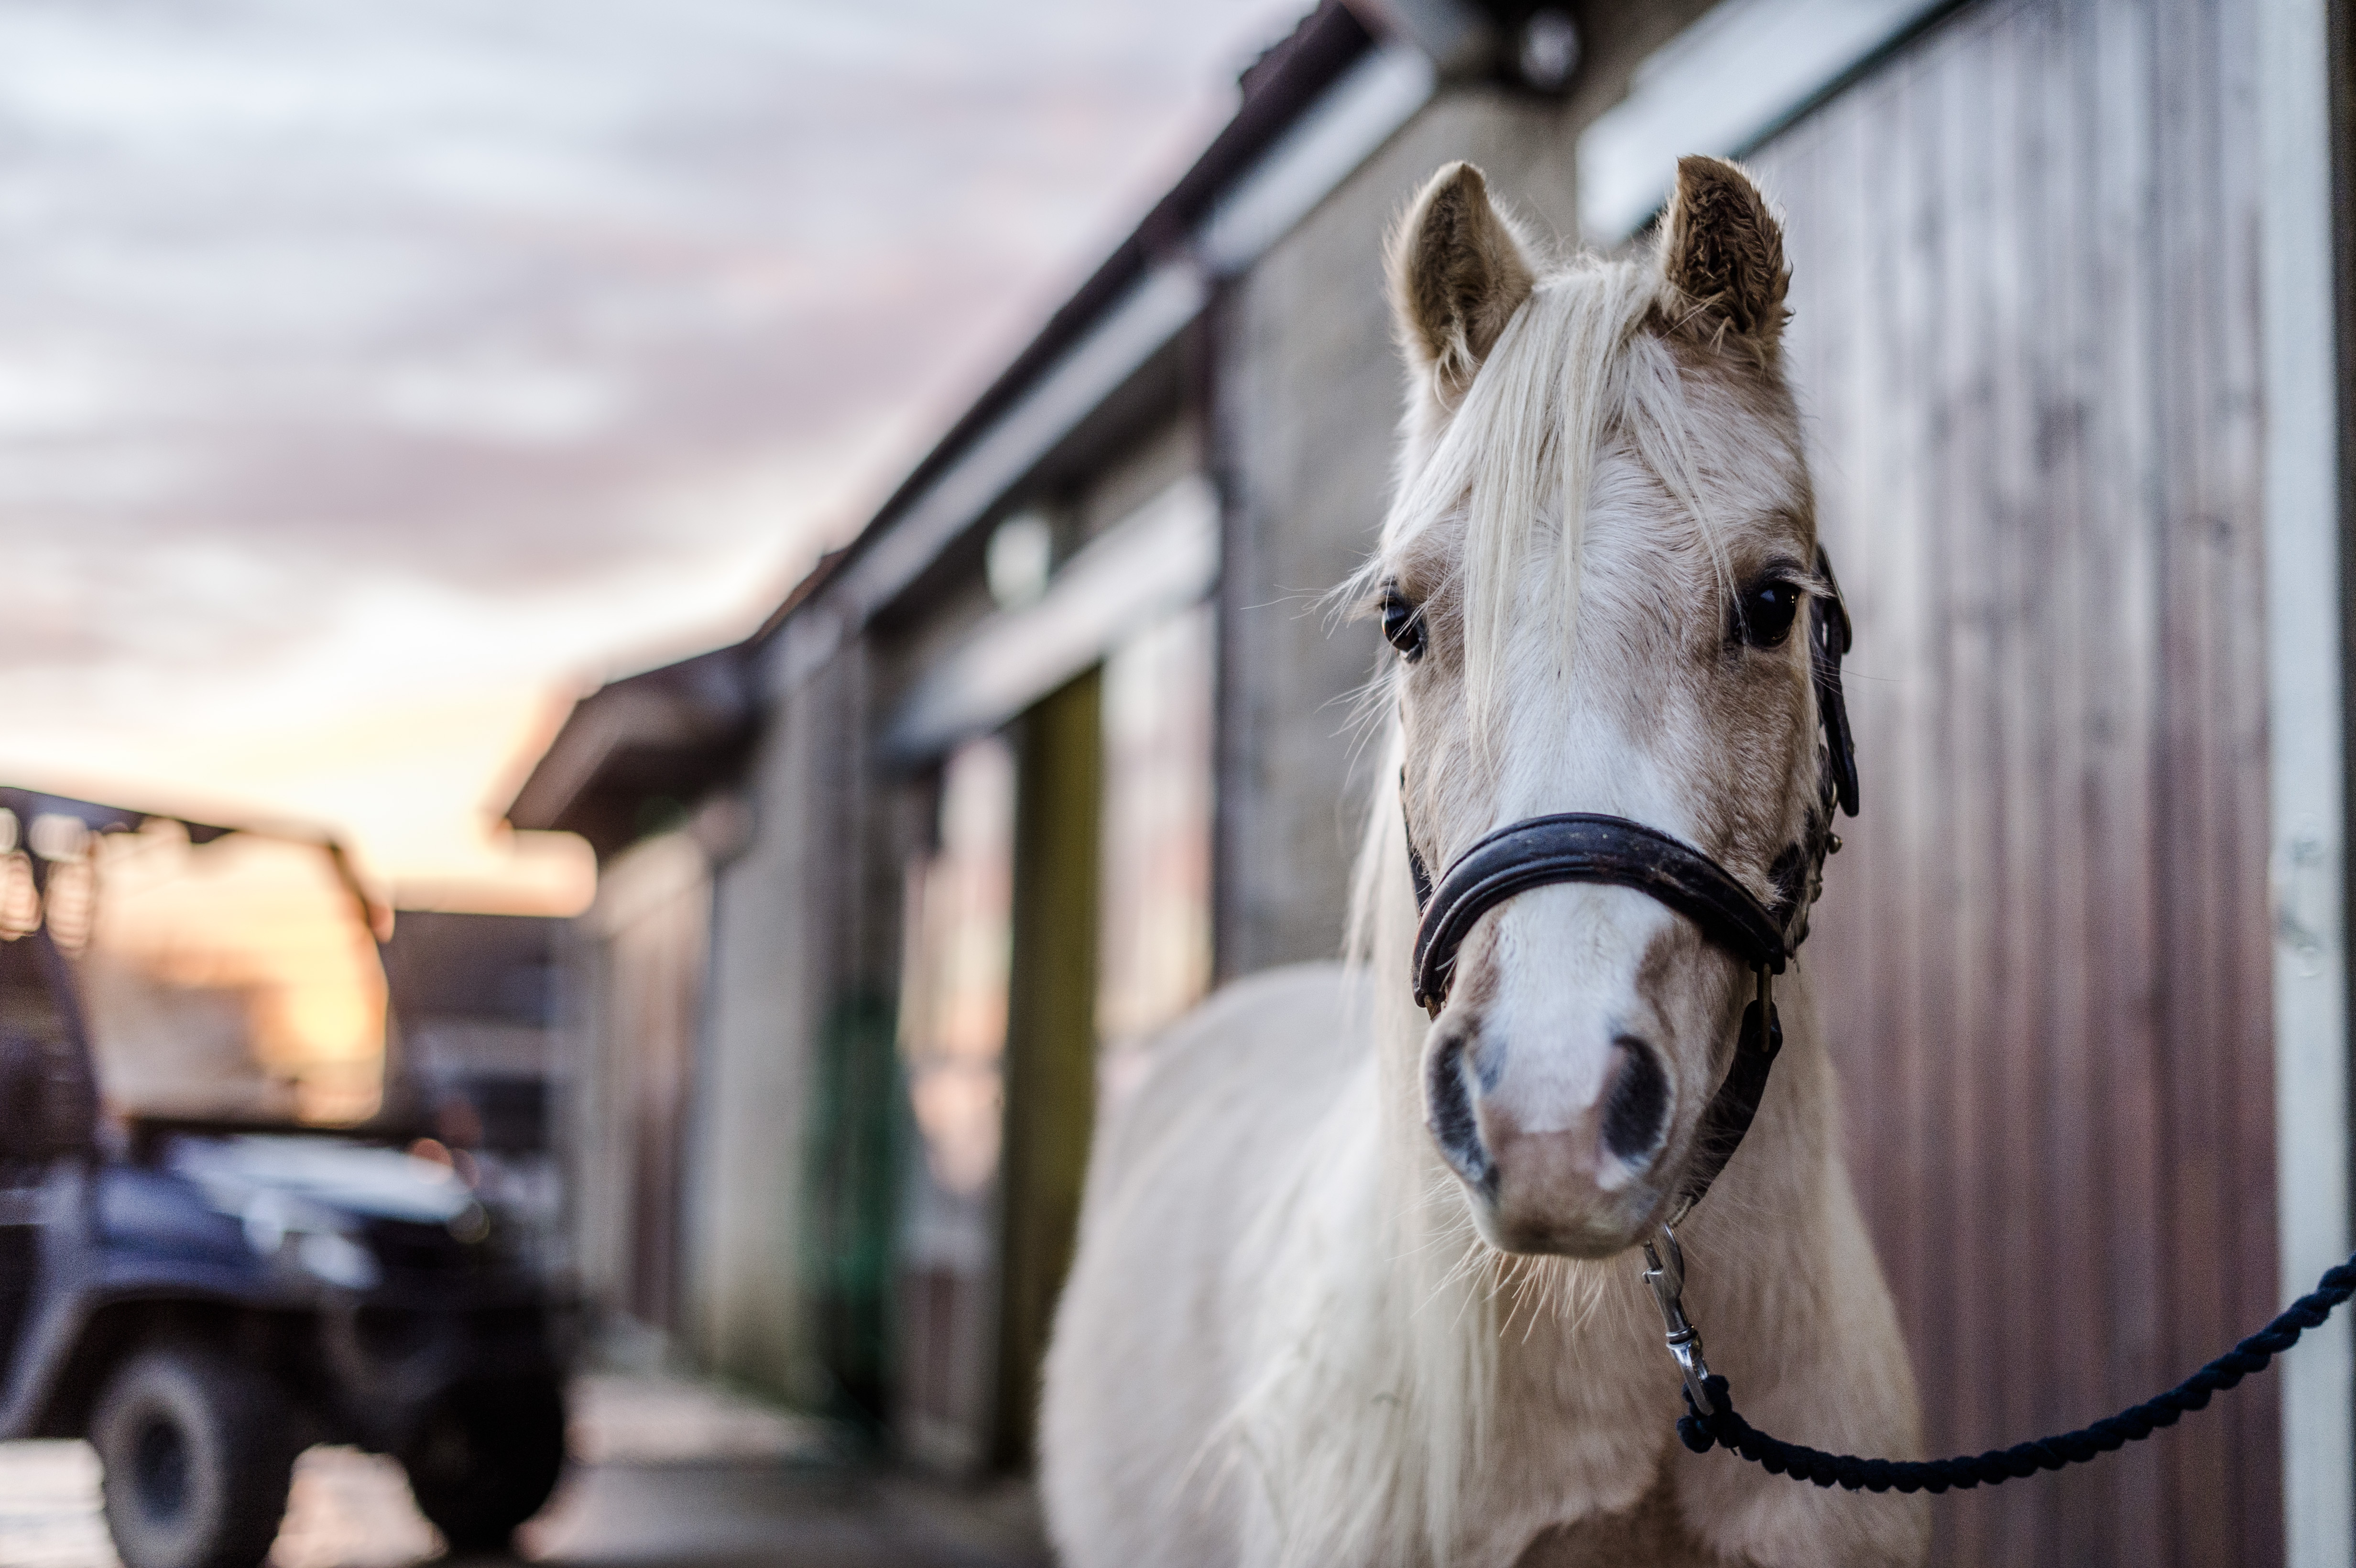 Pony Tizzy at Burford rehoming centre